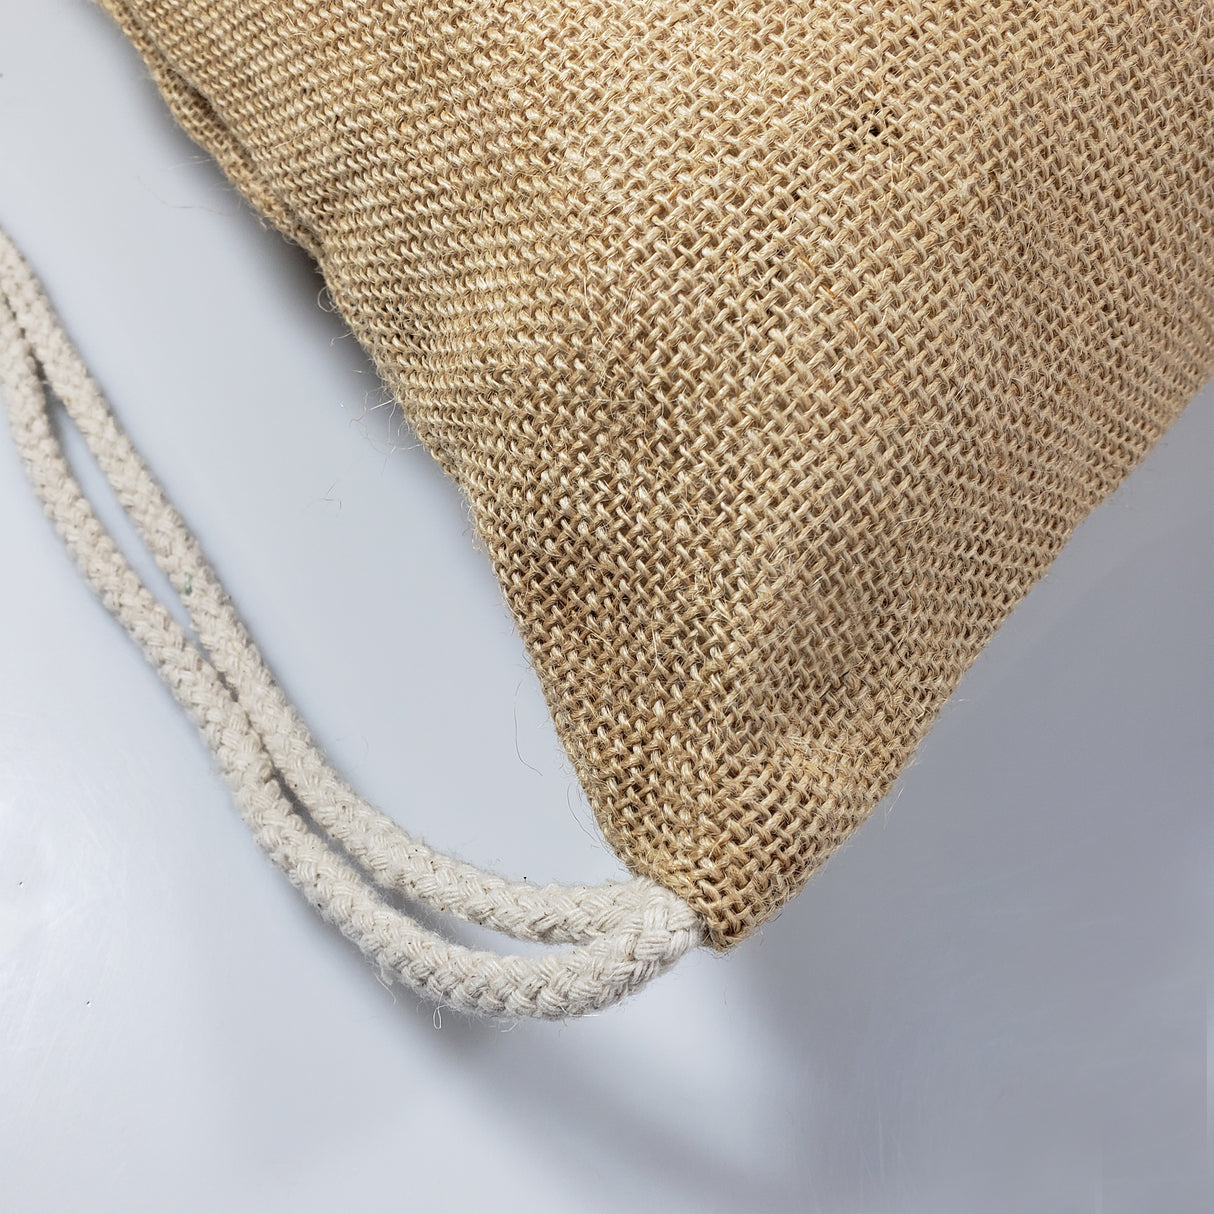 SALTY Drawstring Backpack, Jute and Cotton Backpack, Drawstring